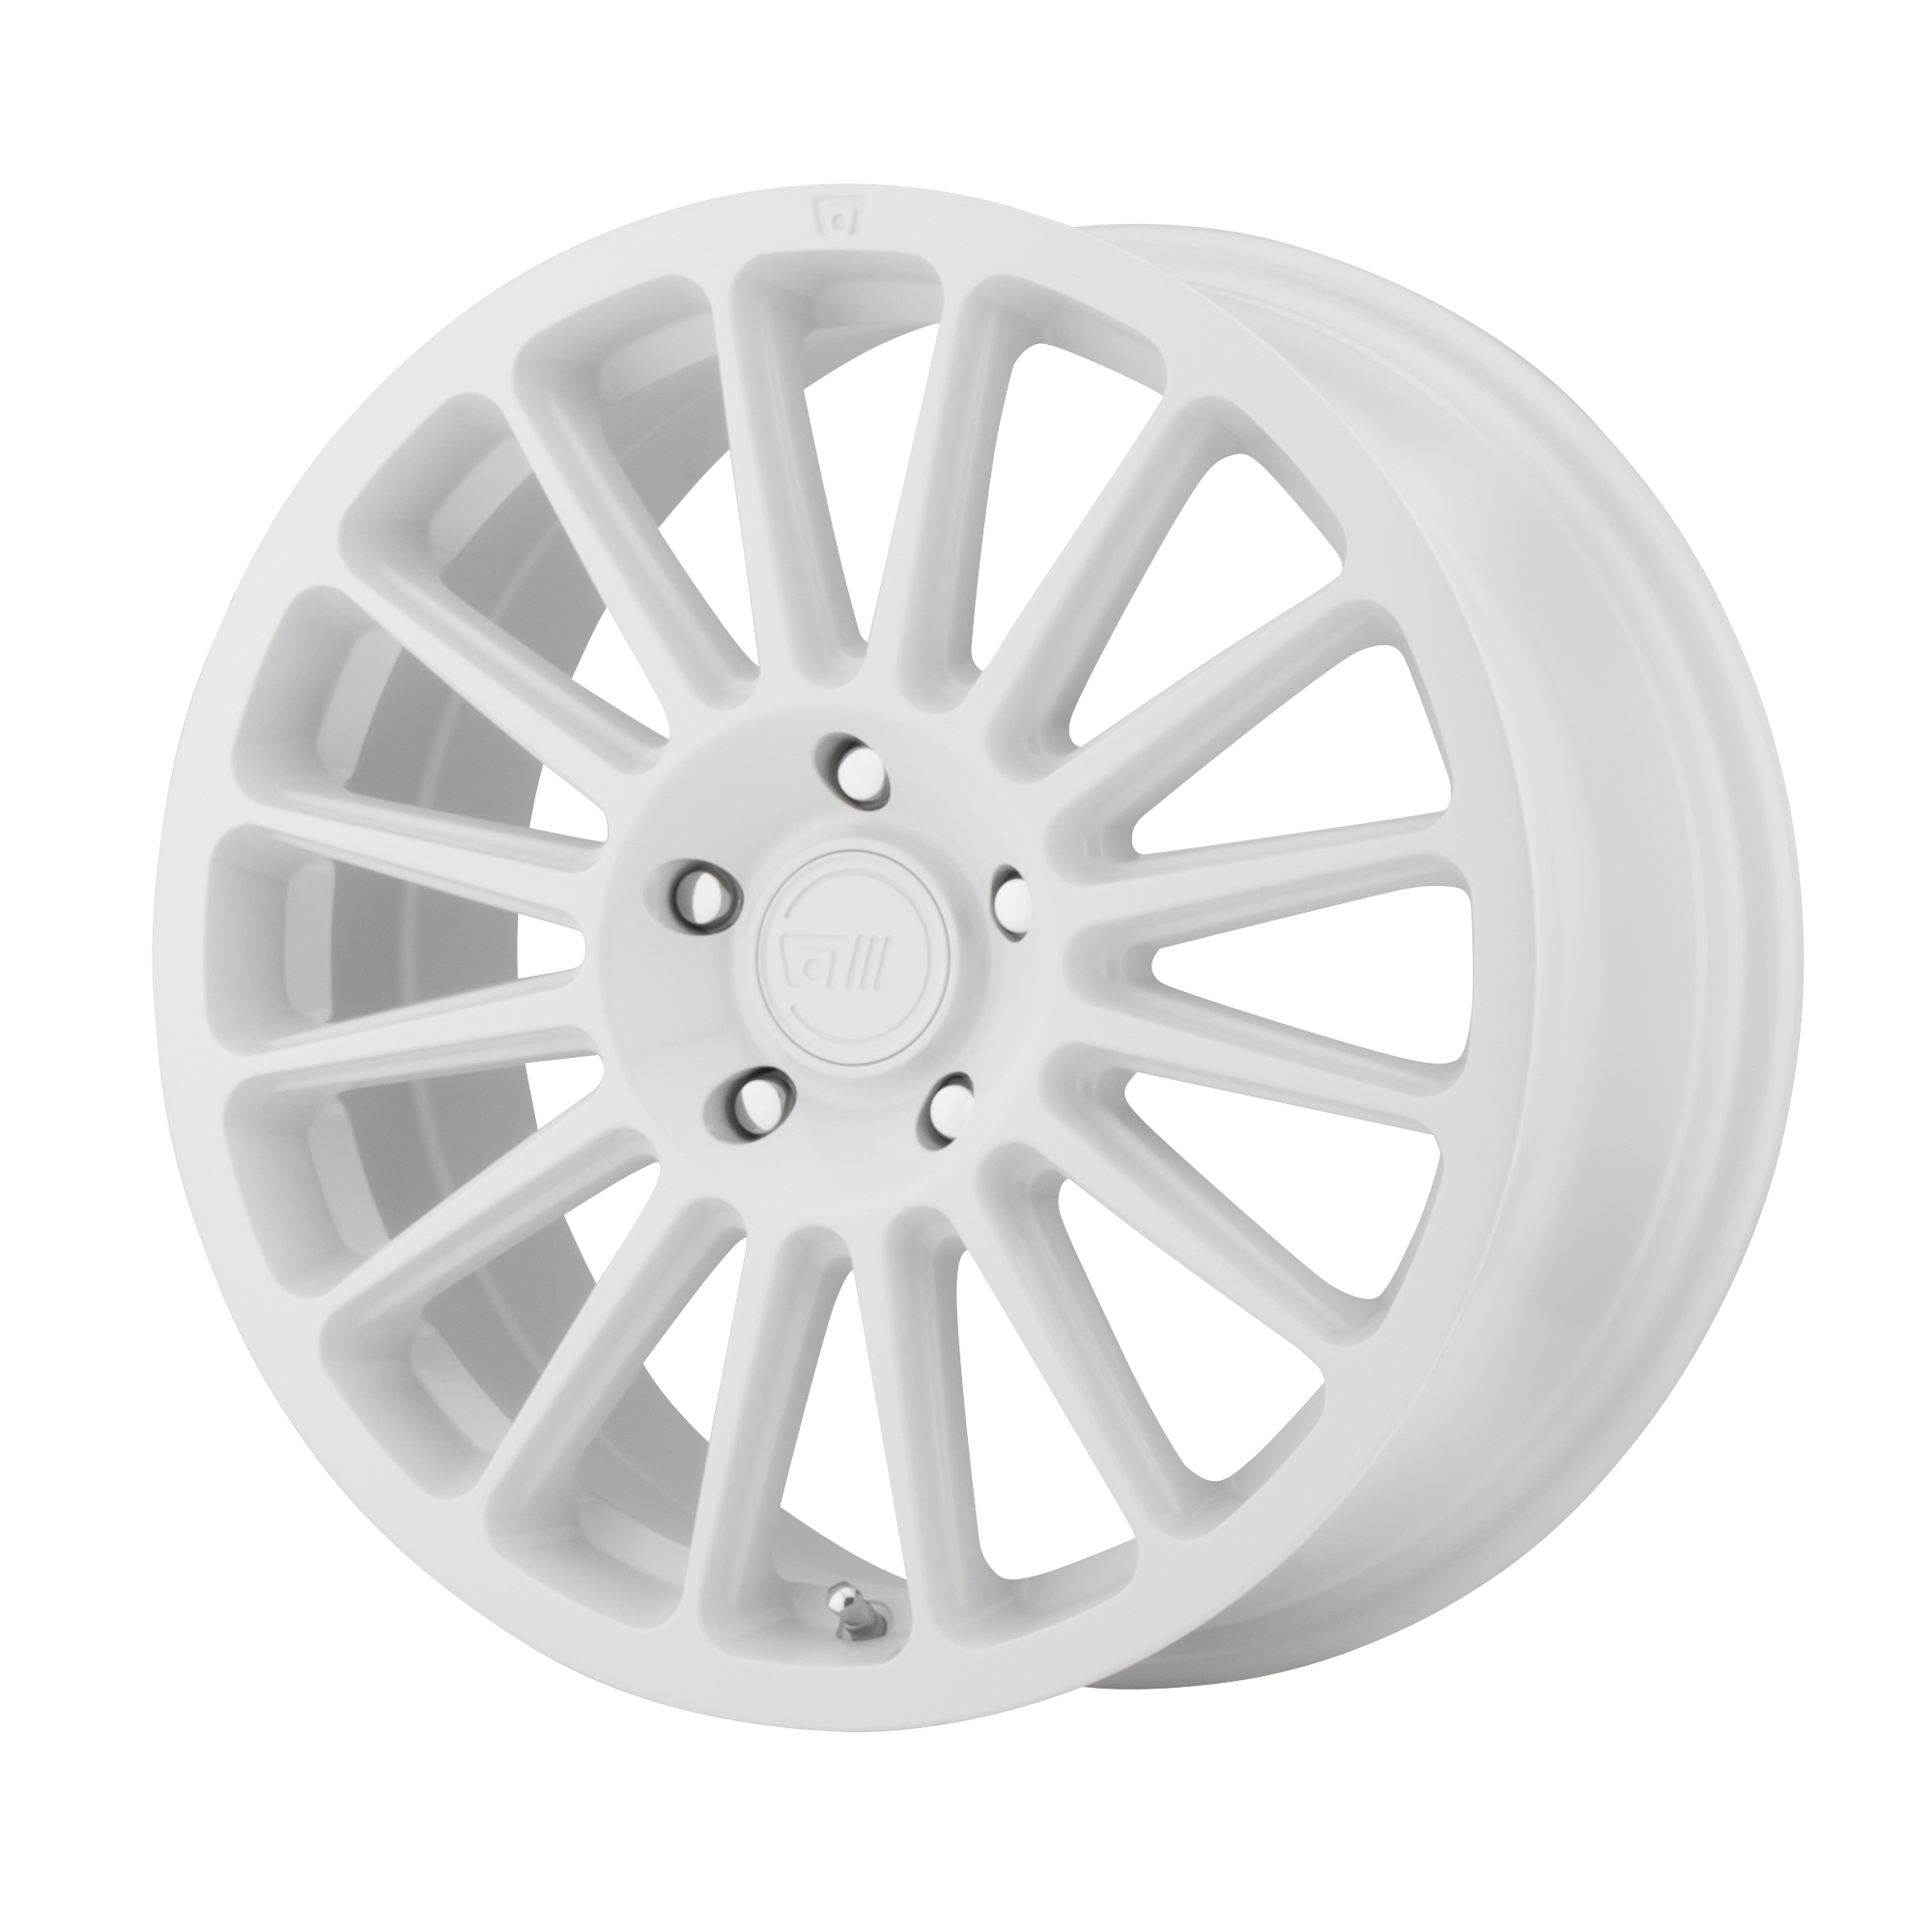 MR141 17x7.5 5x114.30 WHITE (40 mm) - Tires and Engine Performance